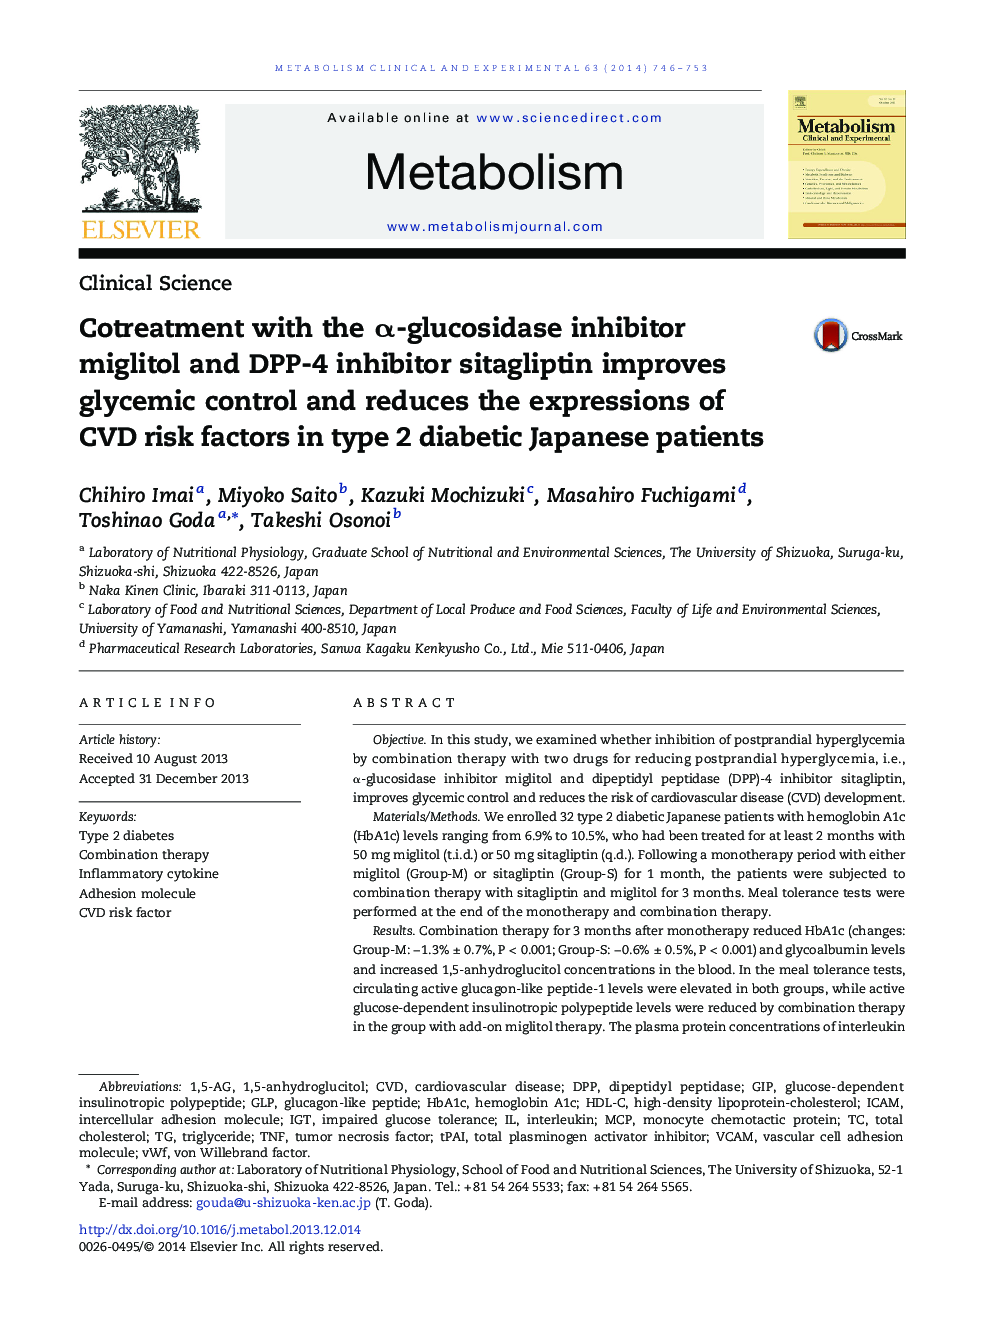 Cotreatment with the α-glucosidase inhibitor miglitol and DPP-4 inhibitor sitagliptin improves glycemic control and reduces the expressions of CVD risk factors in type 2 diabetic Japanese patients